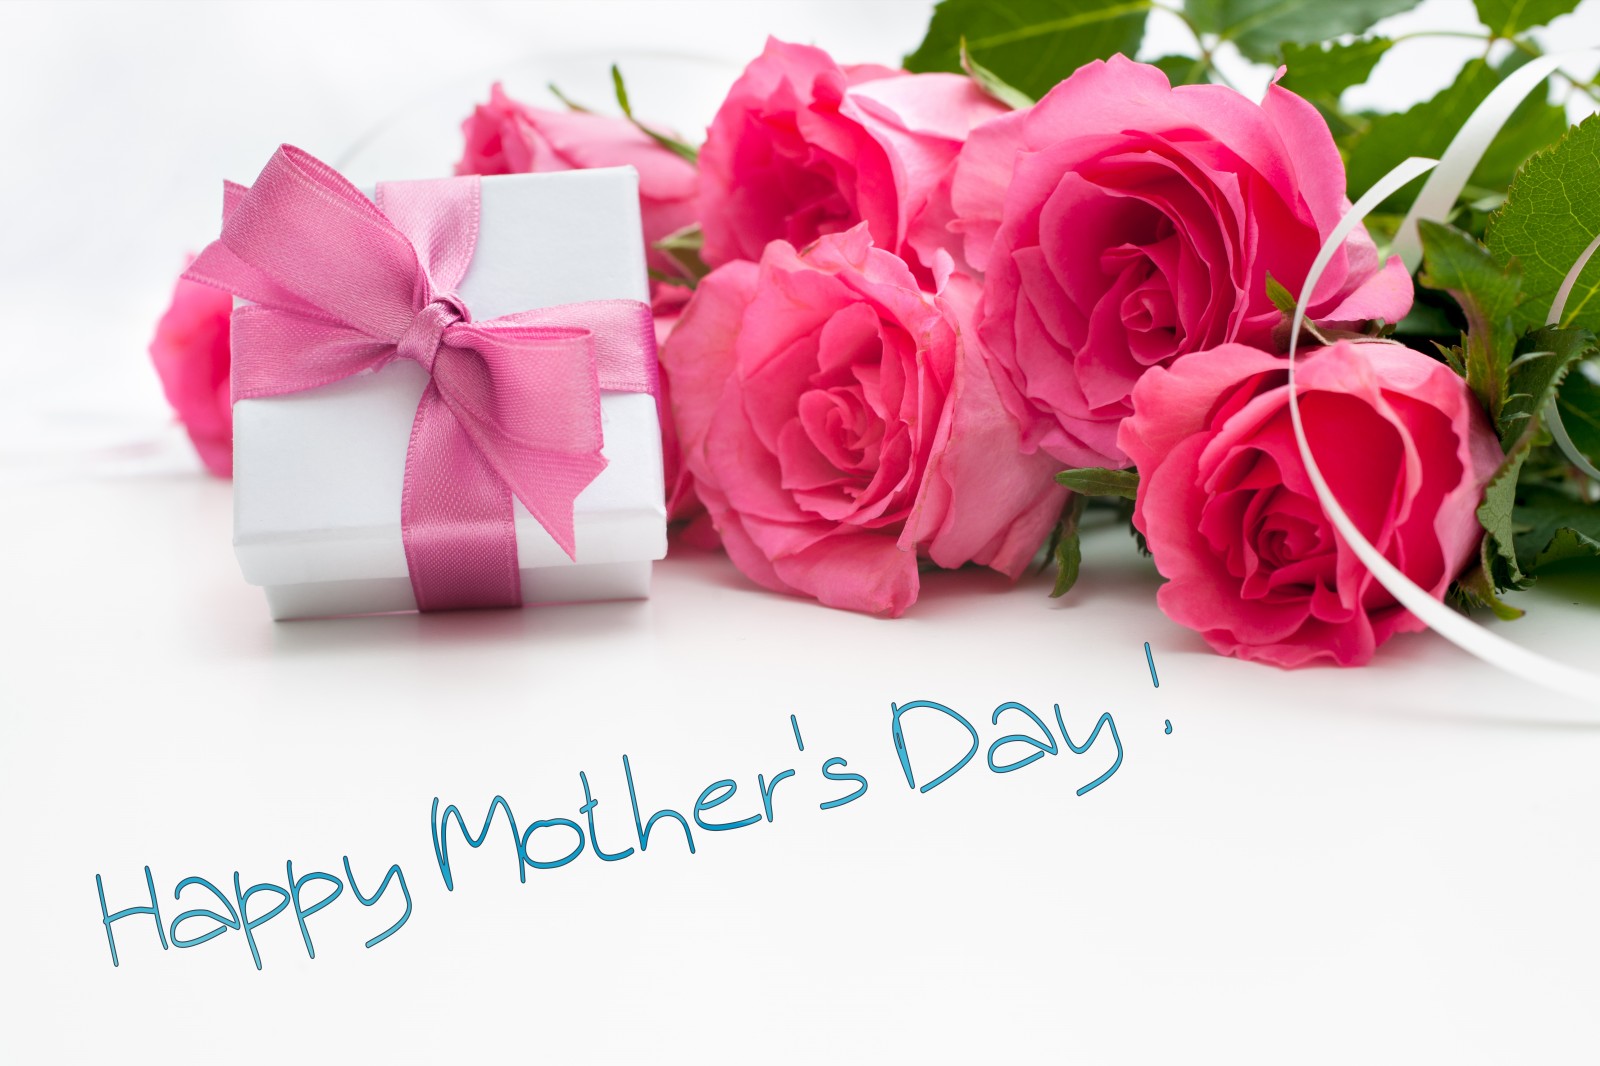 Abstract Beautiful Happy Mothers Day Wallpaper Background Wallpaper Image  For Free Download  Pngtree